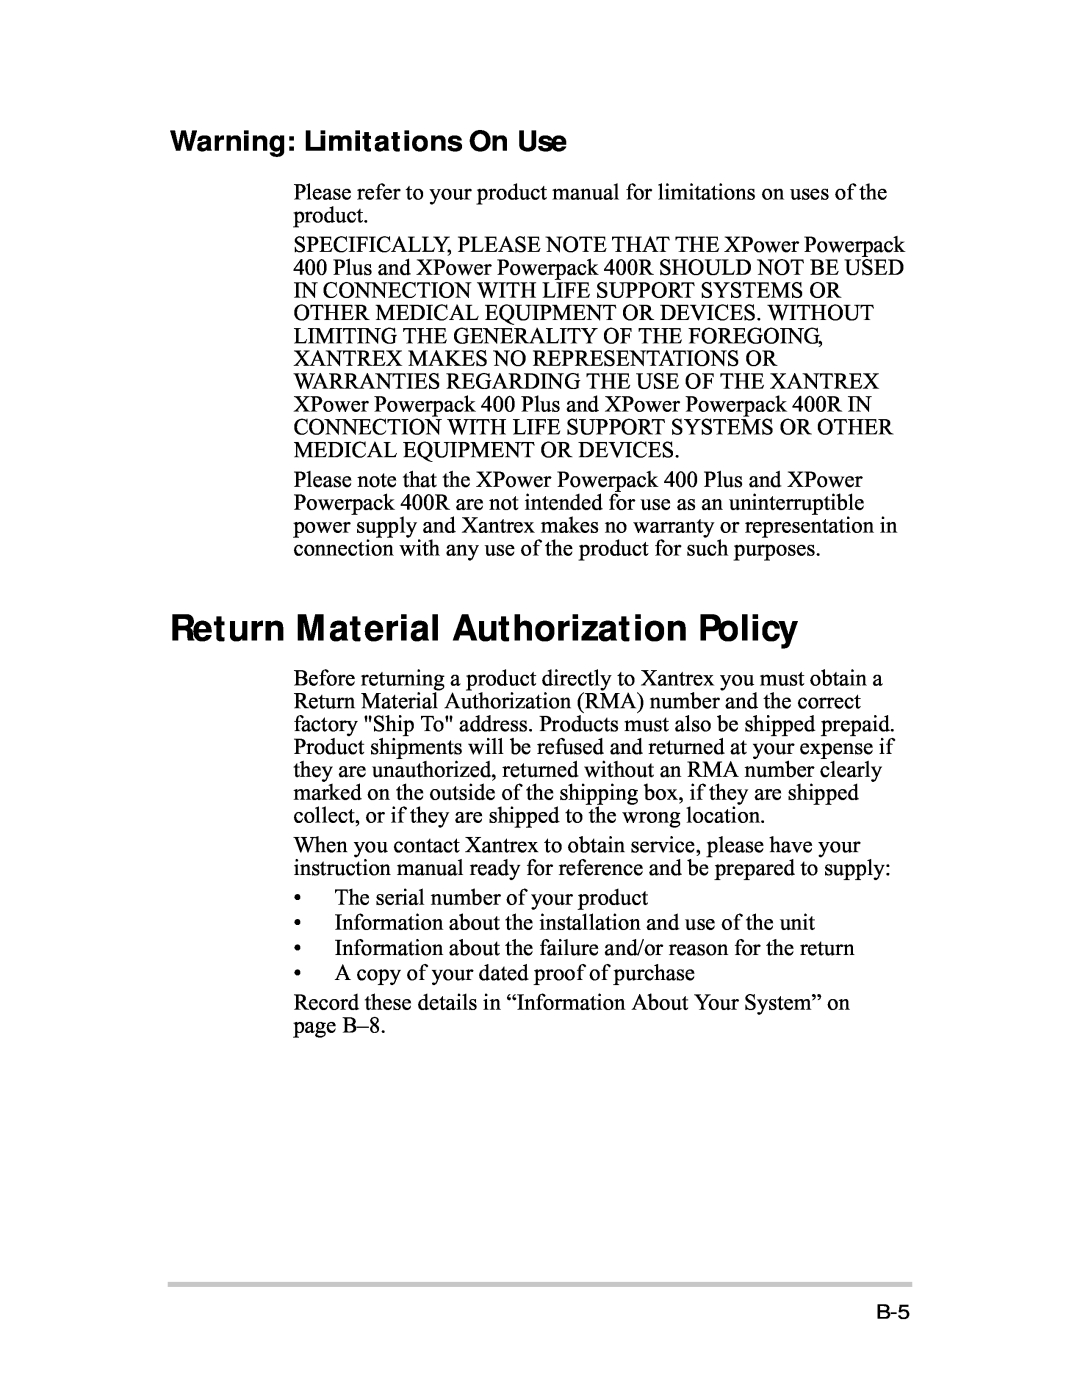 Xantrex Technology 400R manual Return Material Authorization Policy, Warning Limitations On Use 